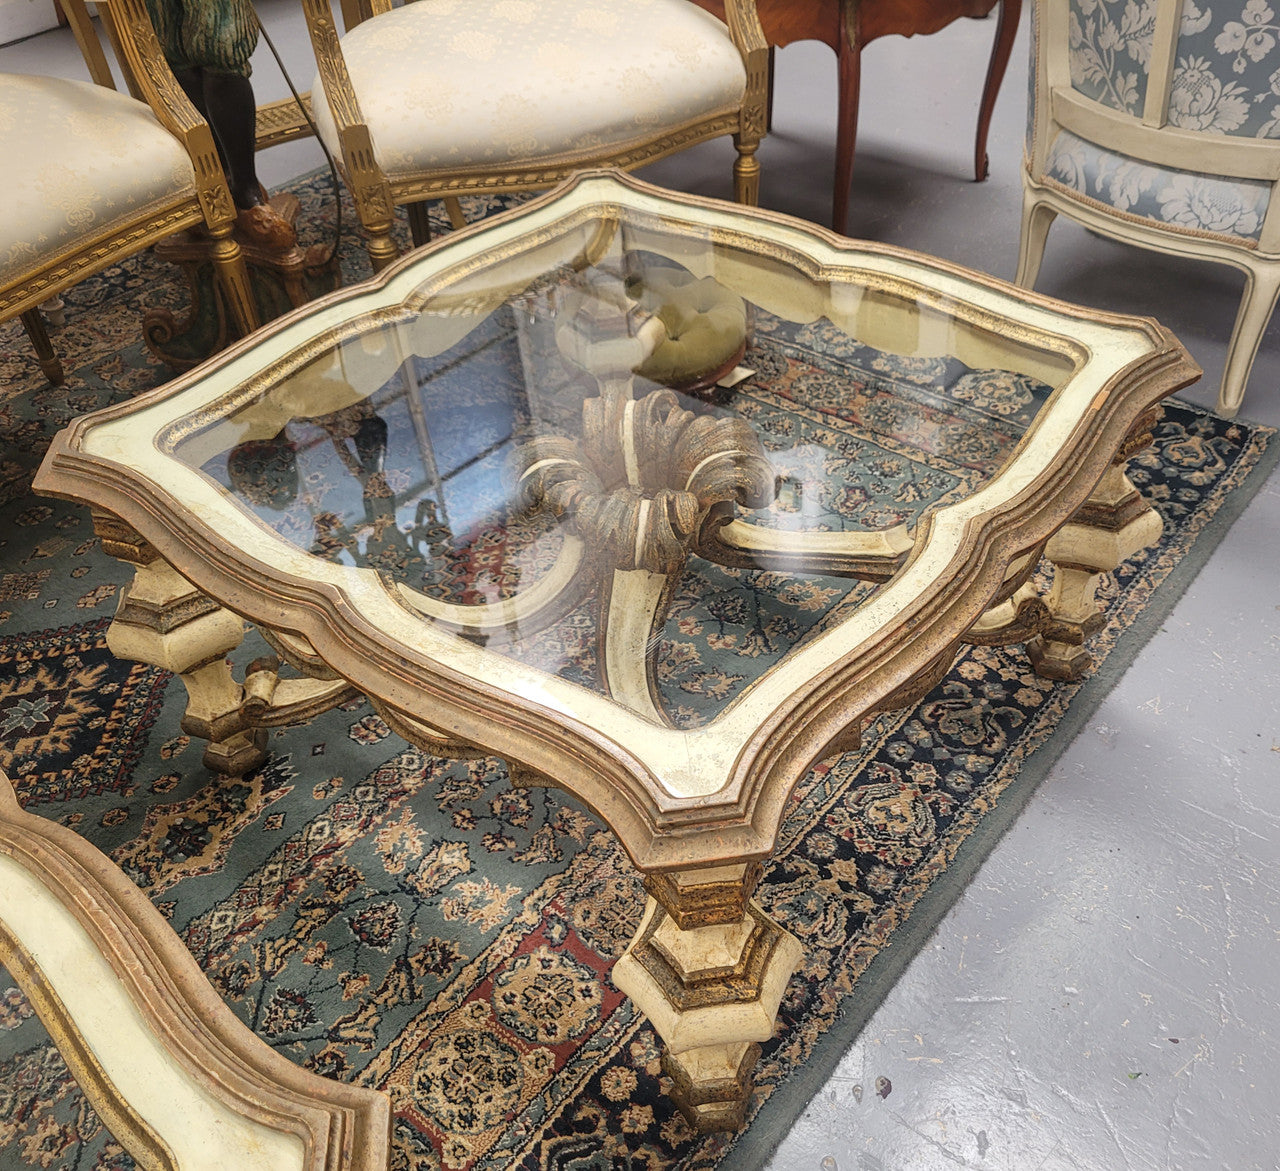 1 of a Pair of Stunning Vintage Italian Painted Florentine Coffee Tables.  Very Decorative and Hard To find.  Price is $1695 for each table.